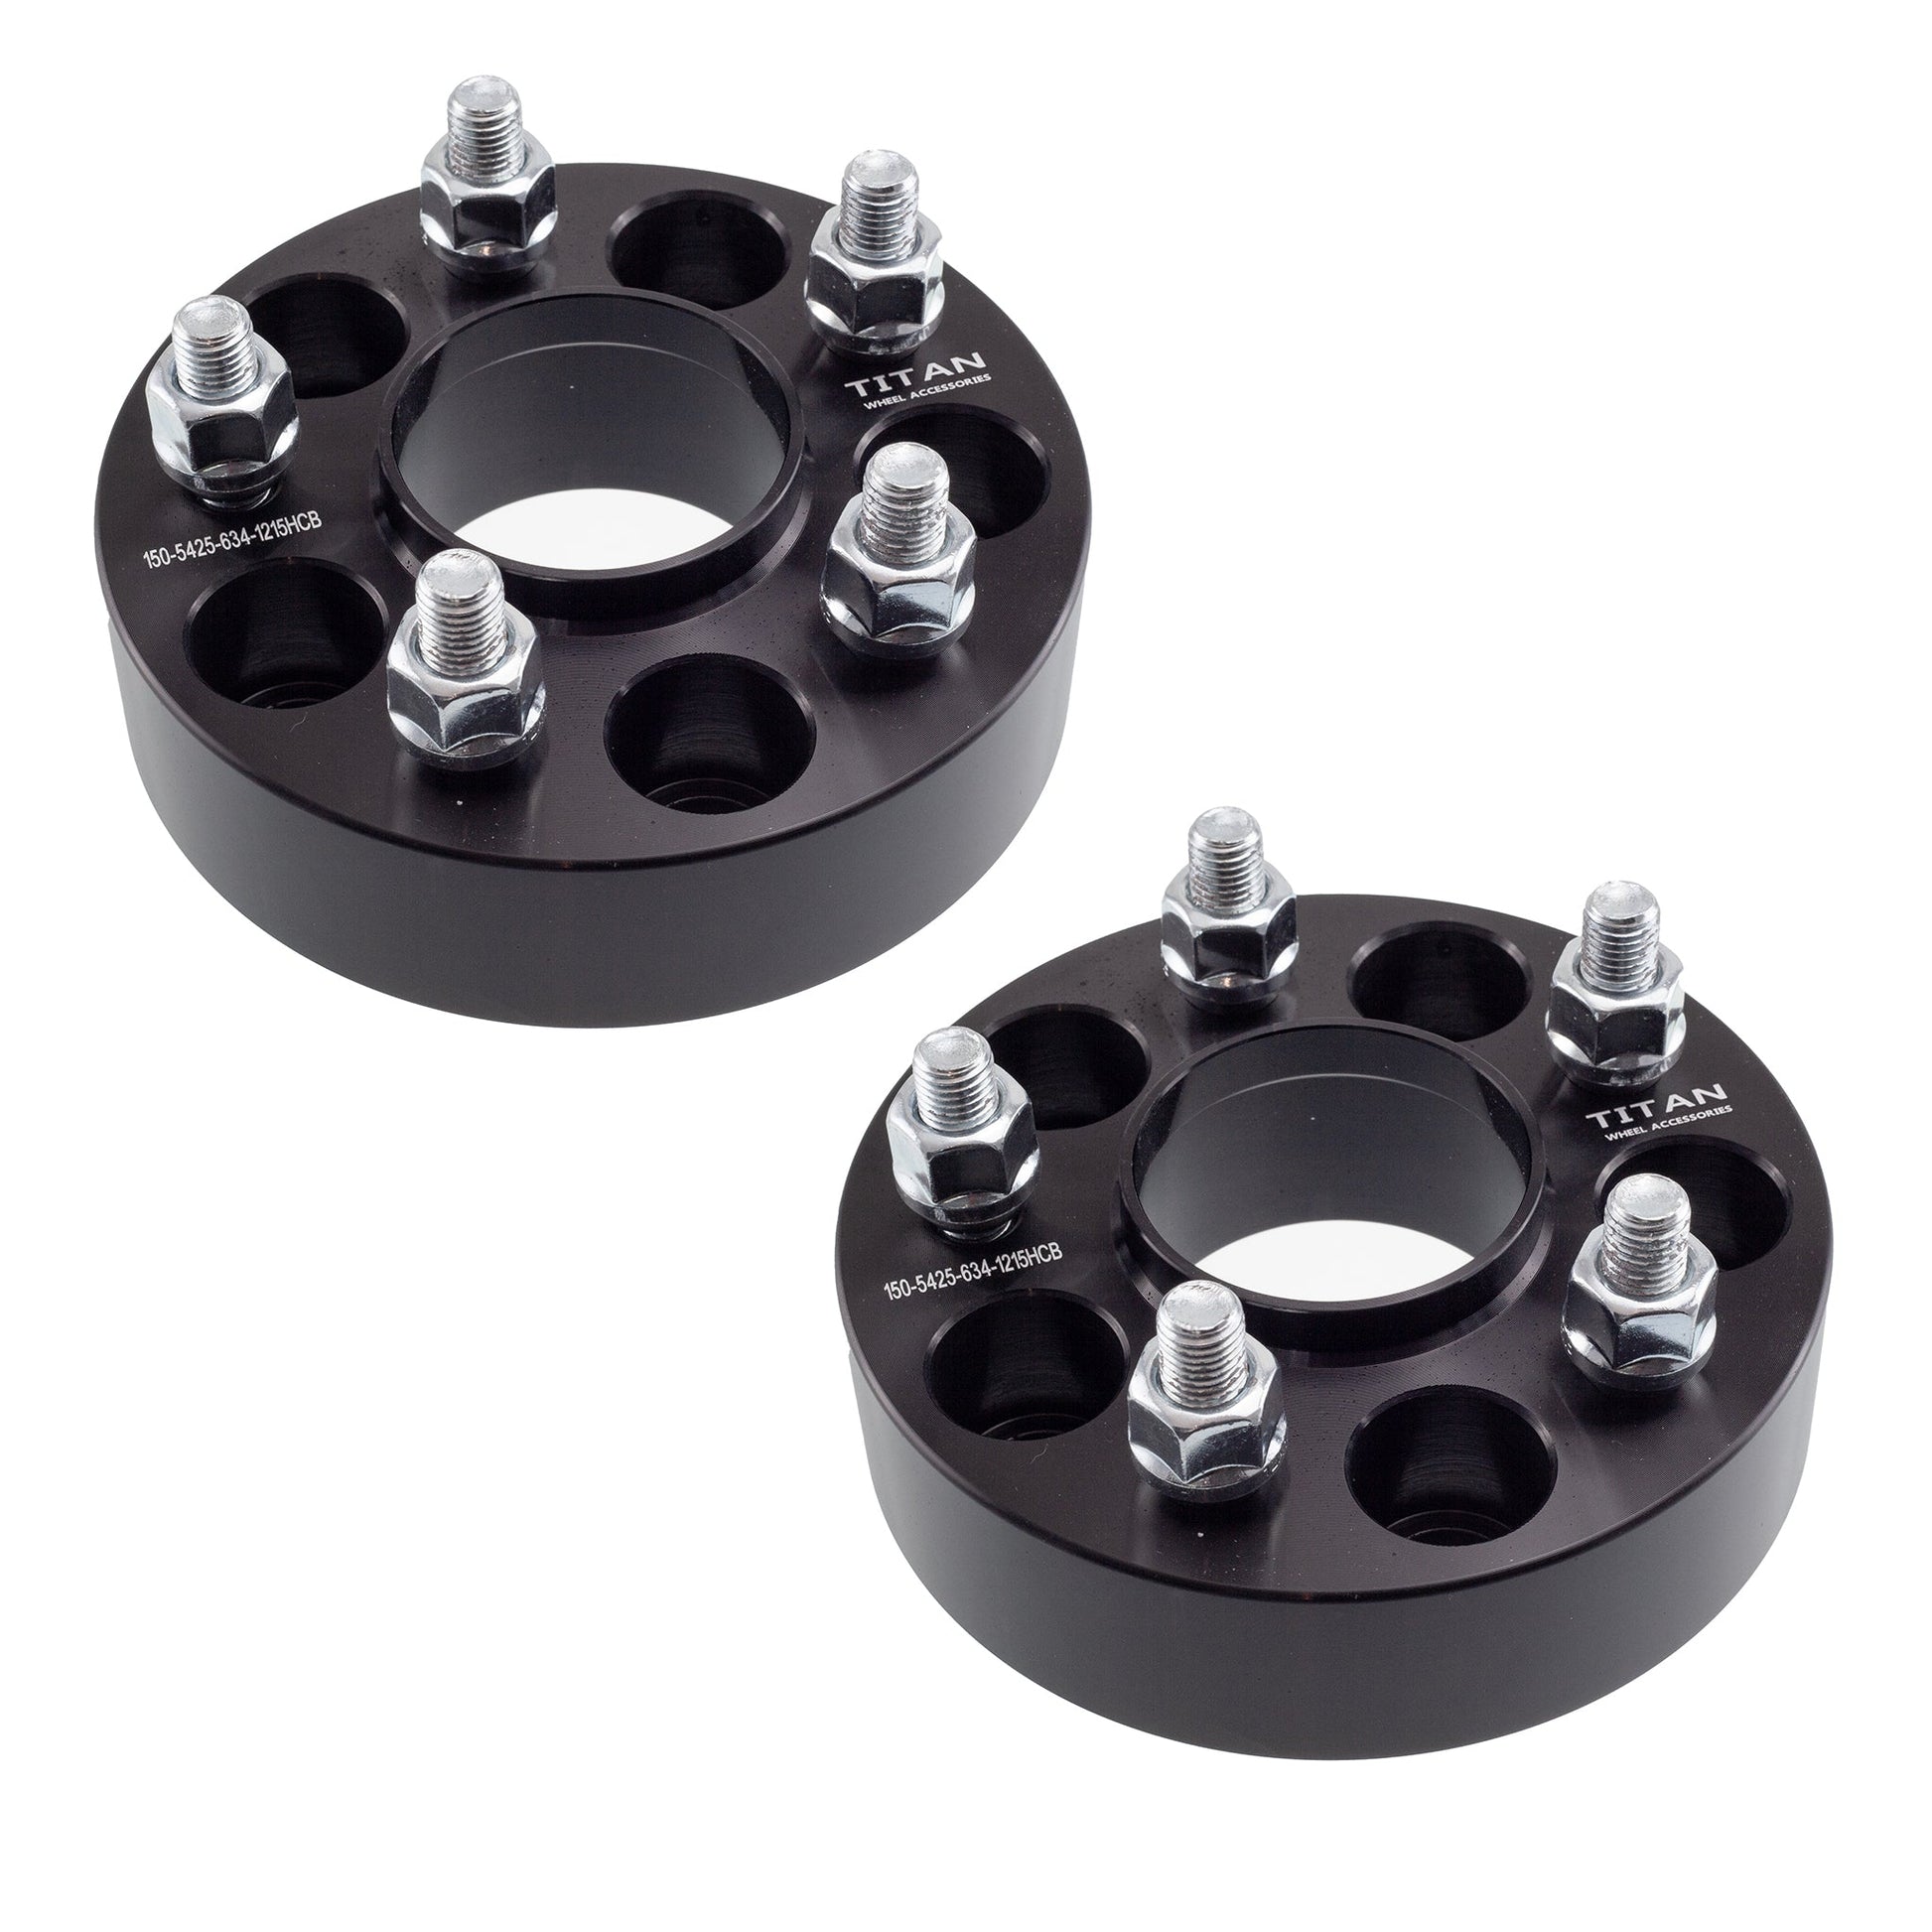 2" (50mm) Titan Wheel Spacers for Volvo C30 C70 S40 V50 | 5x4.25 (5x108) | 63.4 Hubcentric | 12x1.5 Studs |  Set of 4 | Titan Wheel Accessories